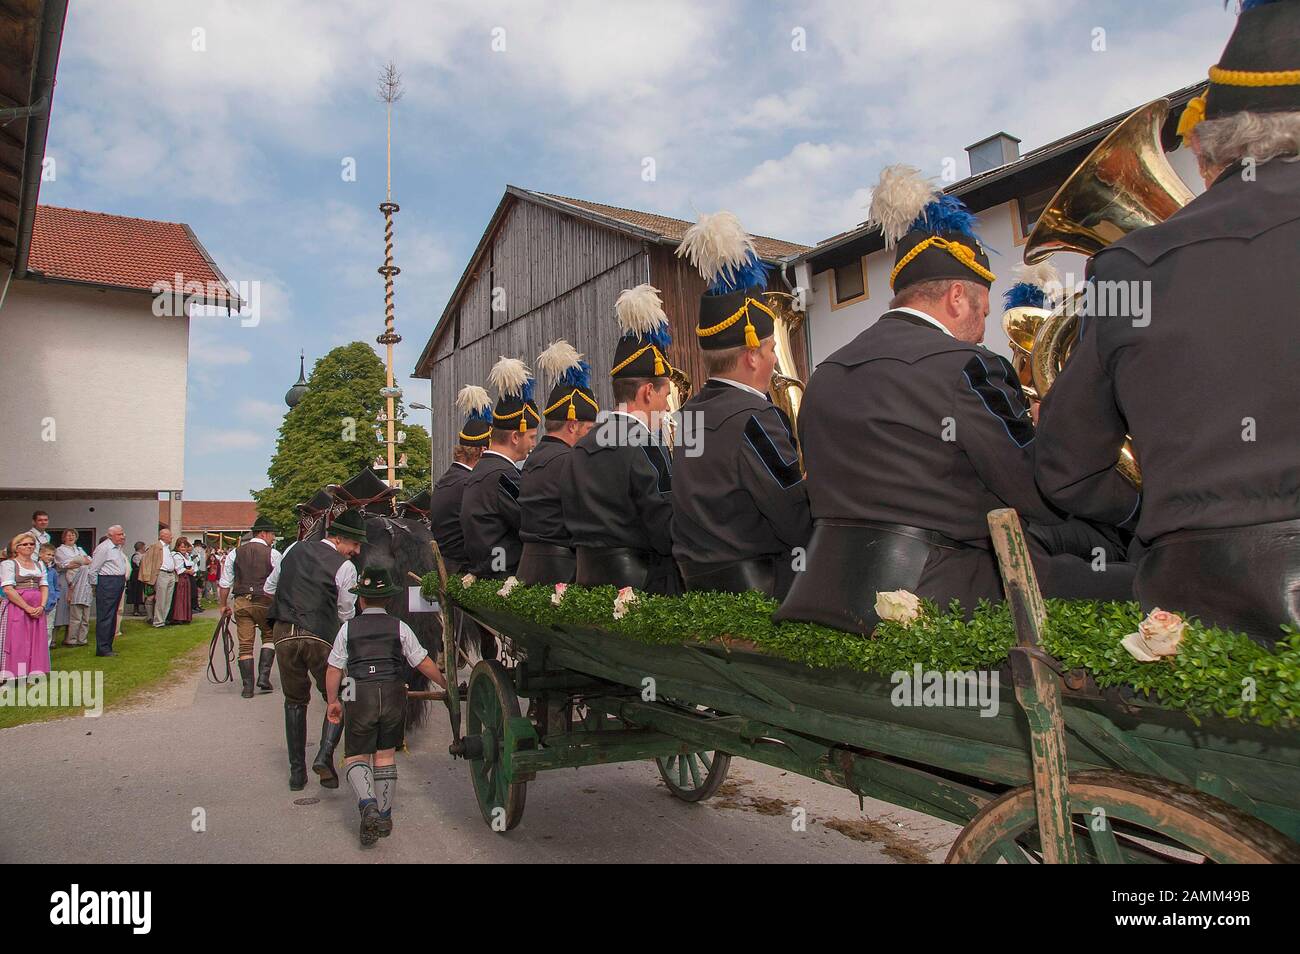 the miners' chapel Neukirchen during the traditional Leonhardir ride in Holzhausen - Teisendorf, Upper Bavaria, the ride is first documented in 1612, the beautifully dressed horses are blessed, Germany [automated translation] Stock Photo